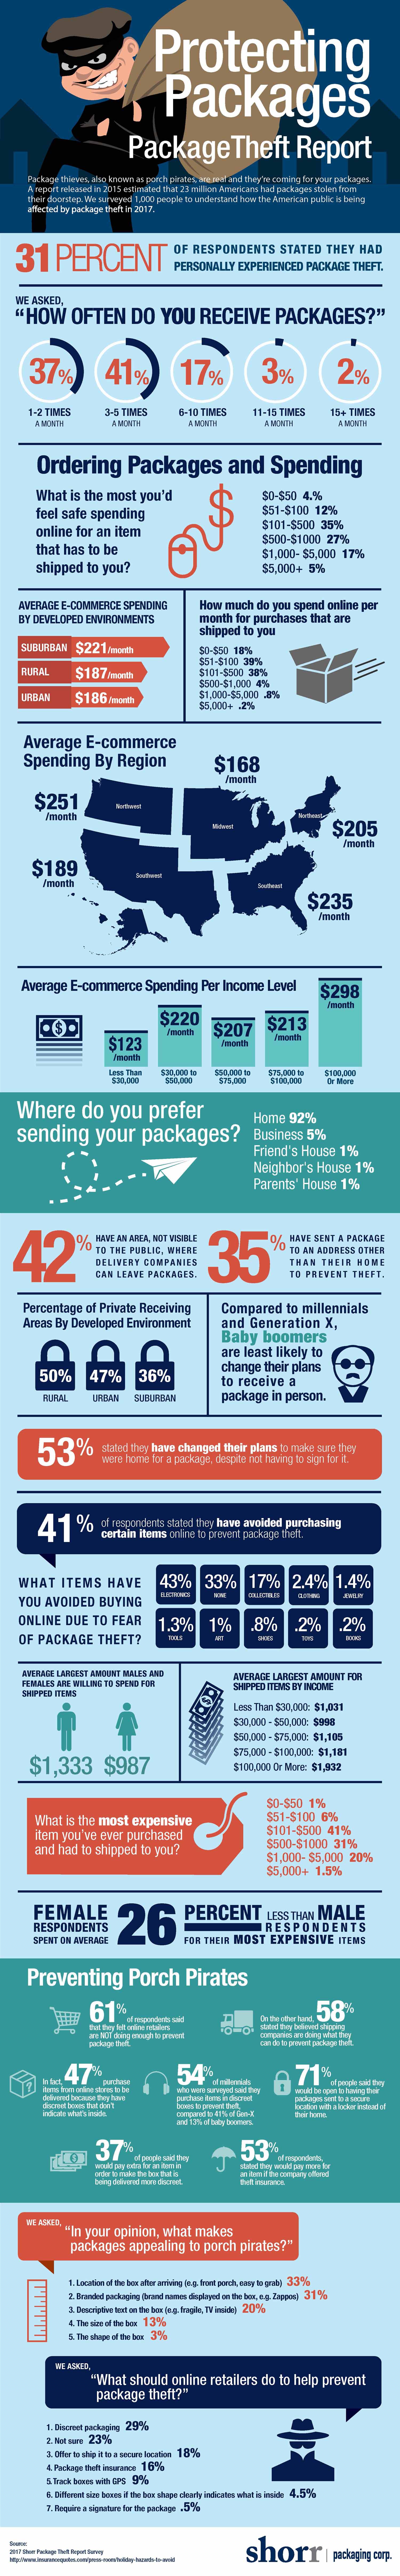 Protecting Packages: The State of Package Theft In The U.S.